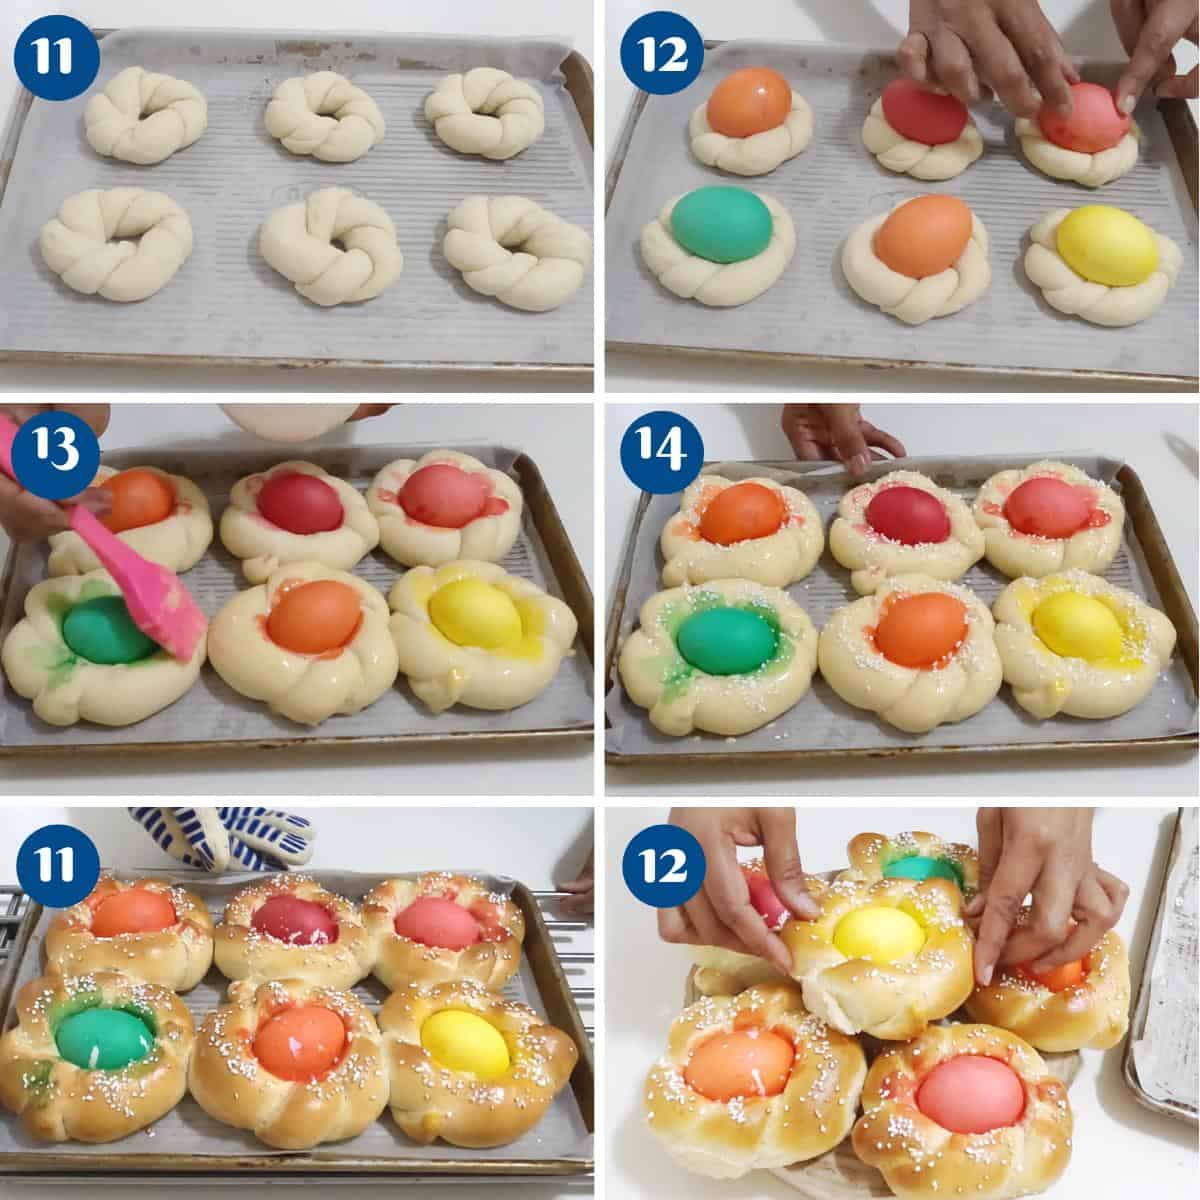 Progress Pictures baking the bread with colored eggs.